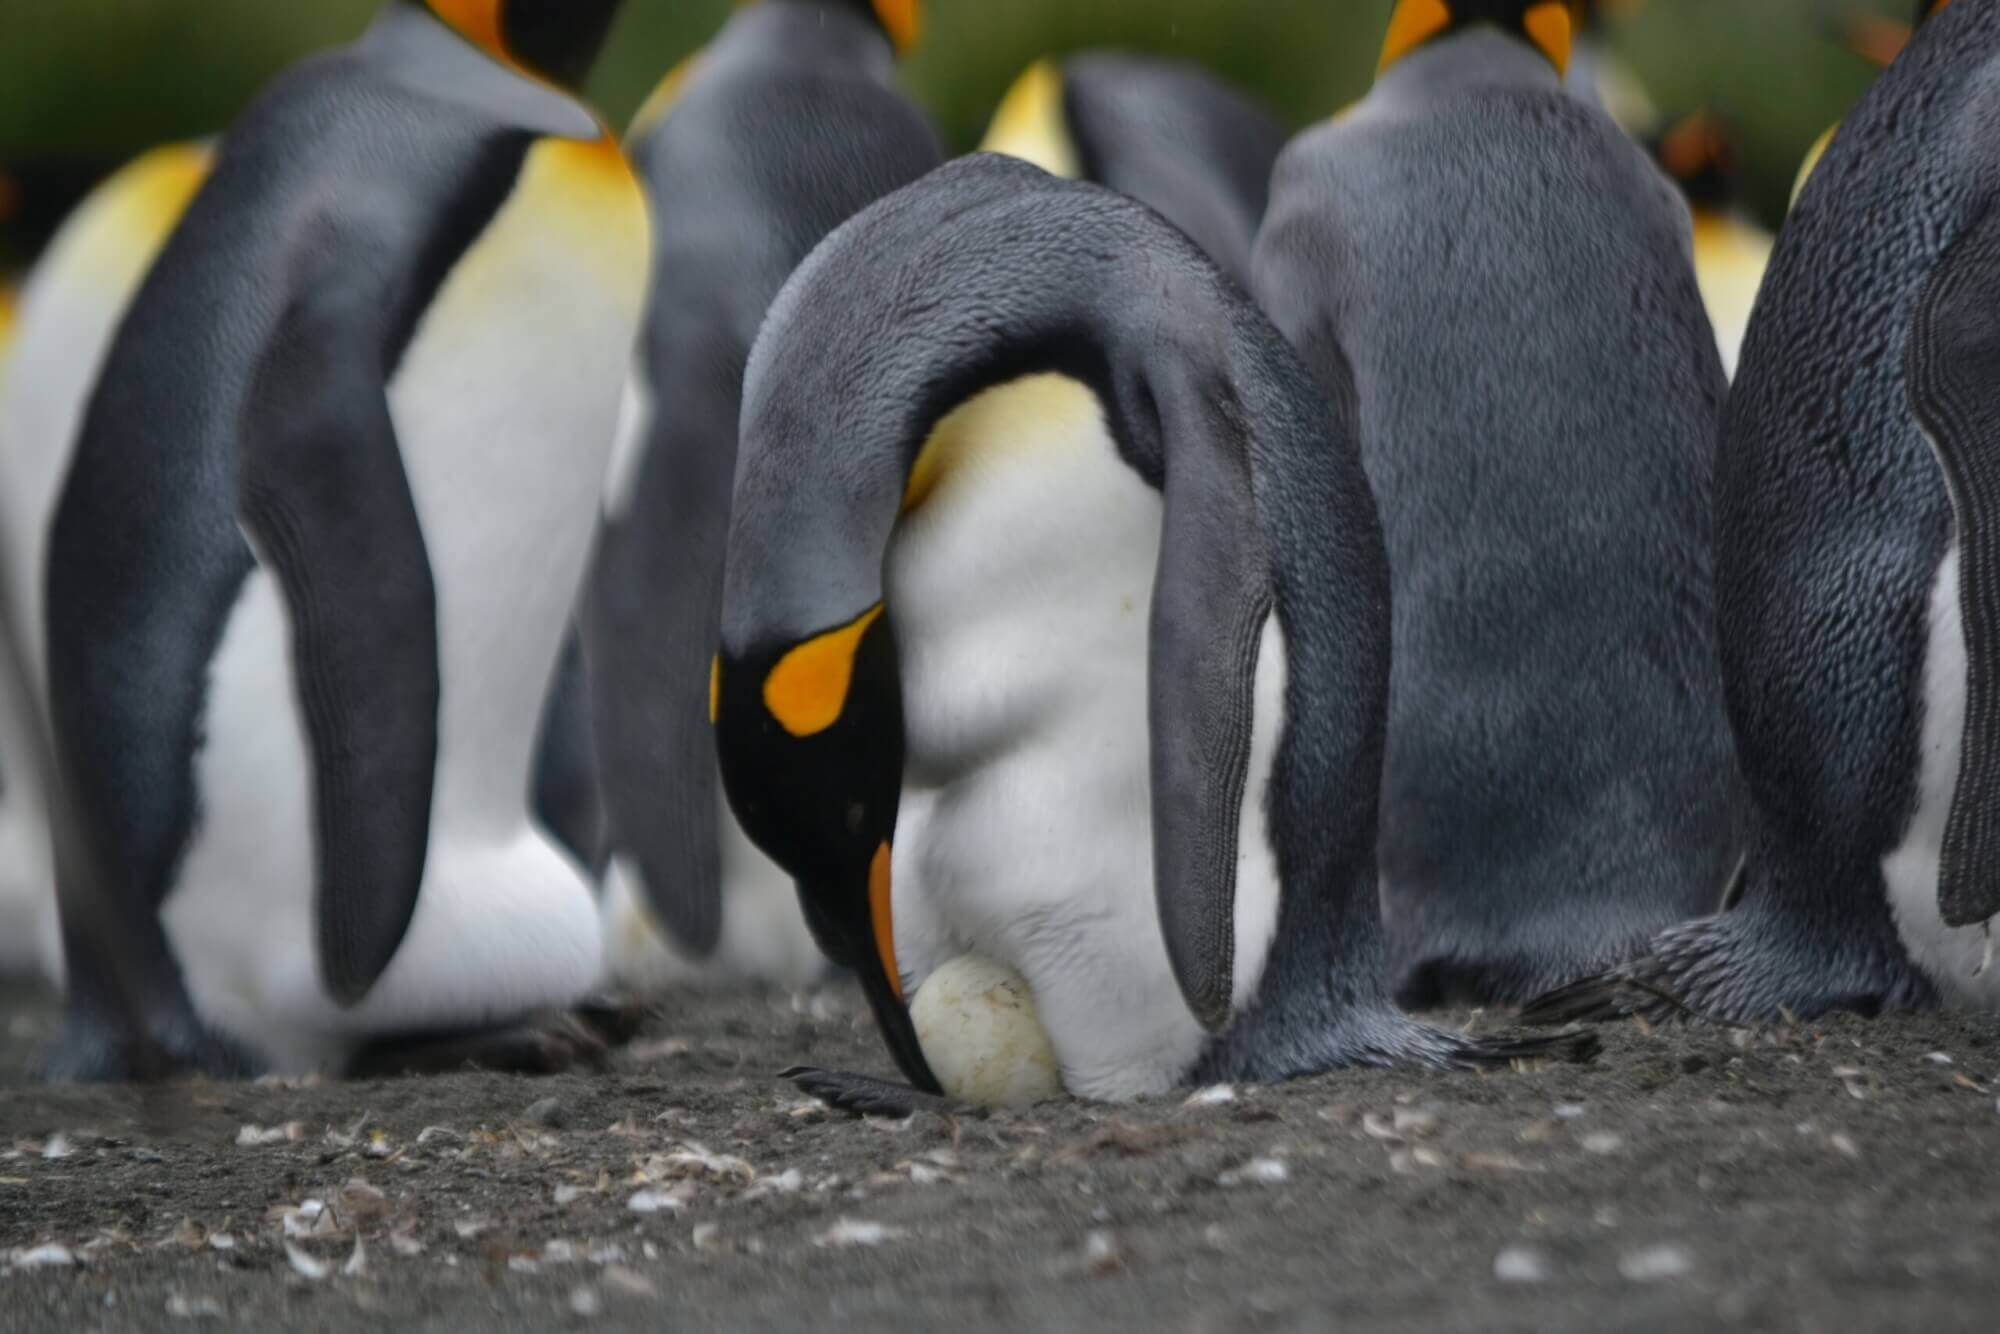 Image from Unsplash of an emperor penguin and his egg